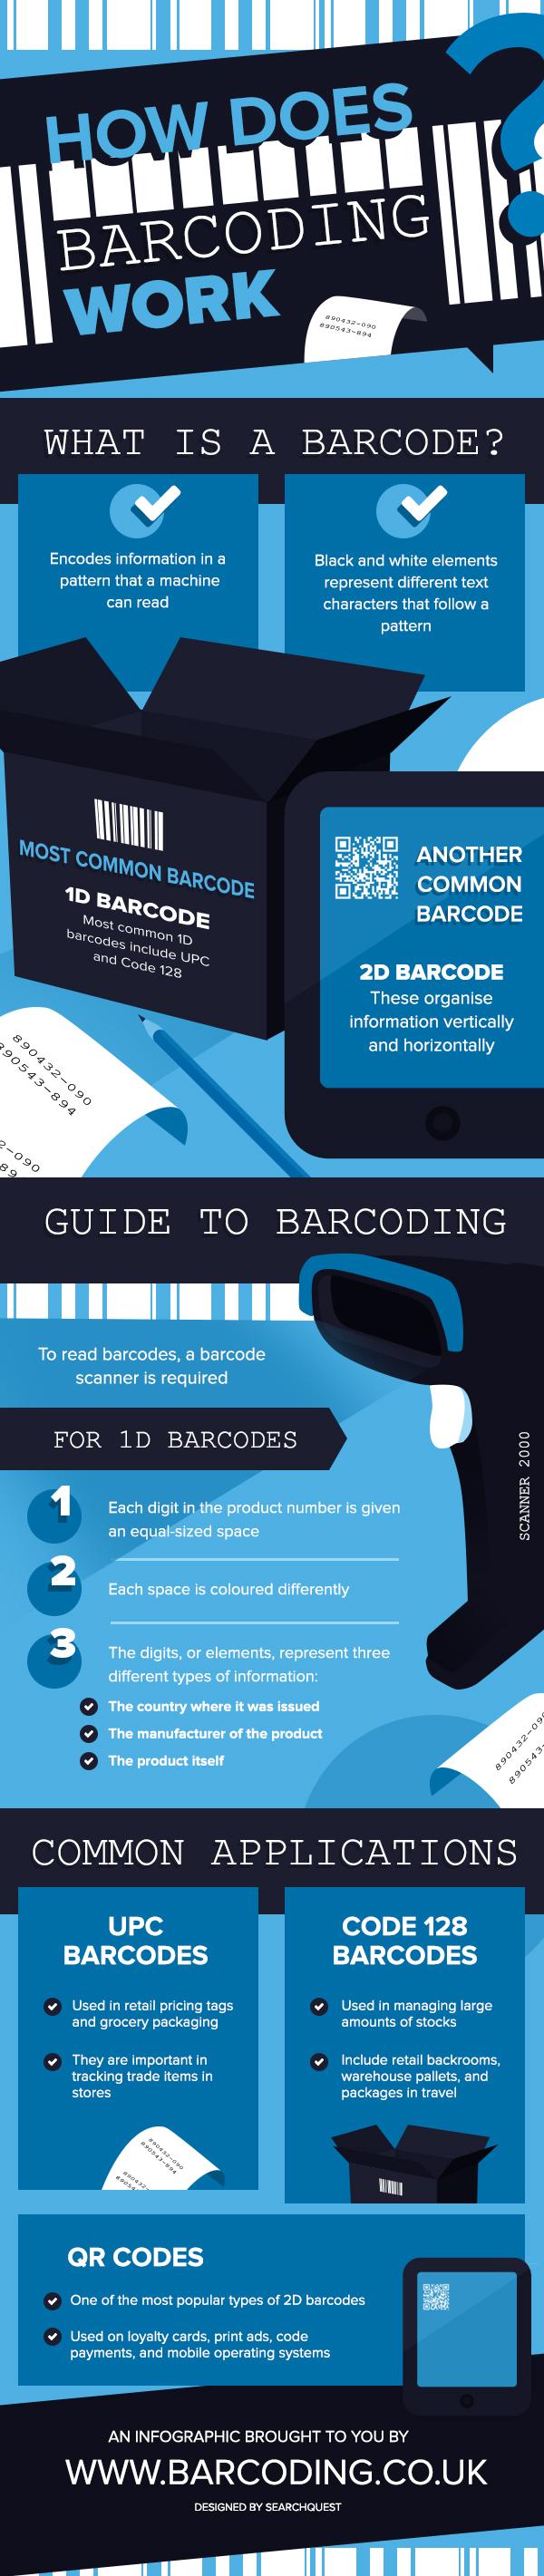 How Does Barcoding Work - Inforgraphic